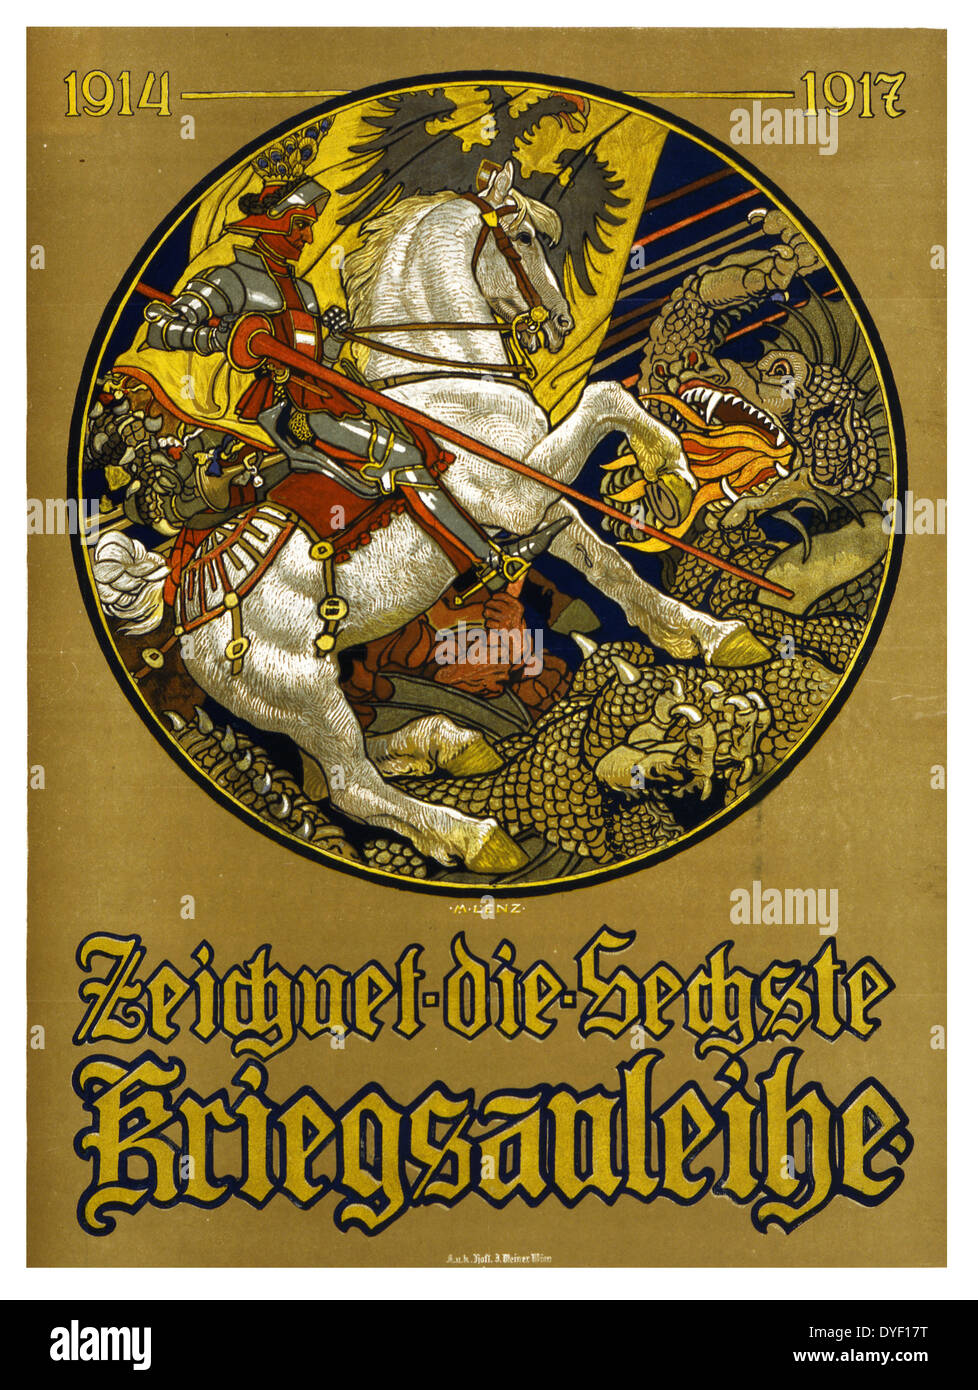 Zeichnet die sechste Kriegsanleihe, 1914-1917 by Maximilian Lenz, 1860-1948, artist. Published. Poster shows a knight on horseback, with the Austro-Hungarian banner behind him, slaying a dragon. Text: Subscribe to the 6th War Loan. 1917 Stock Photo